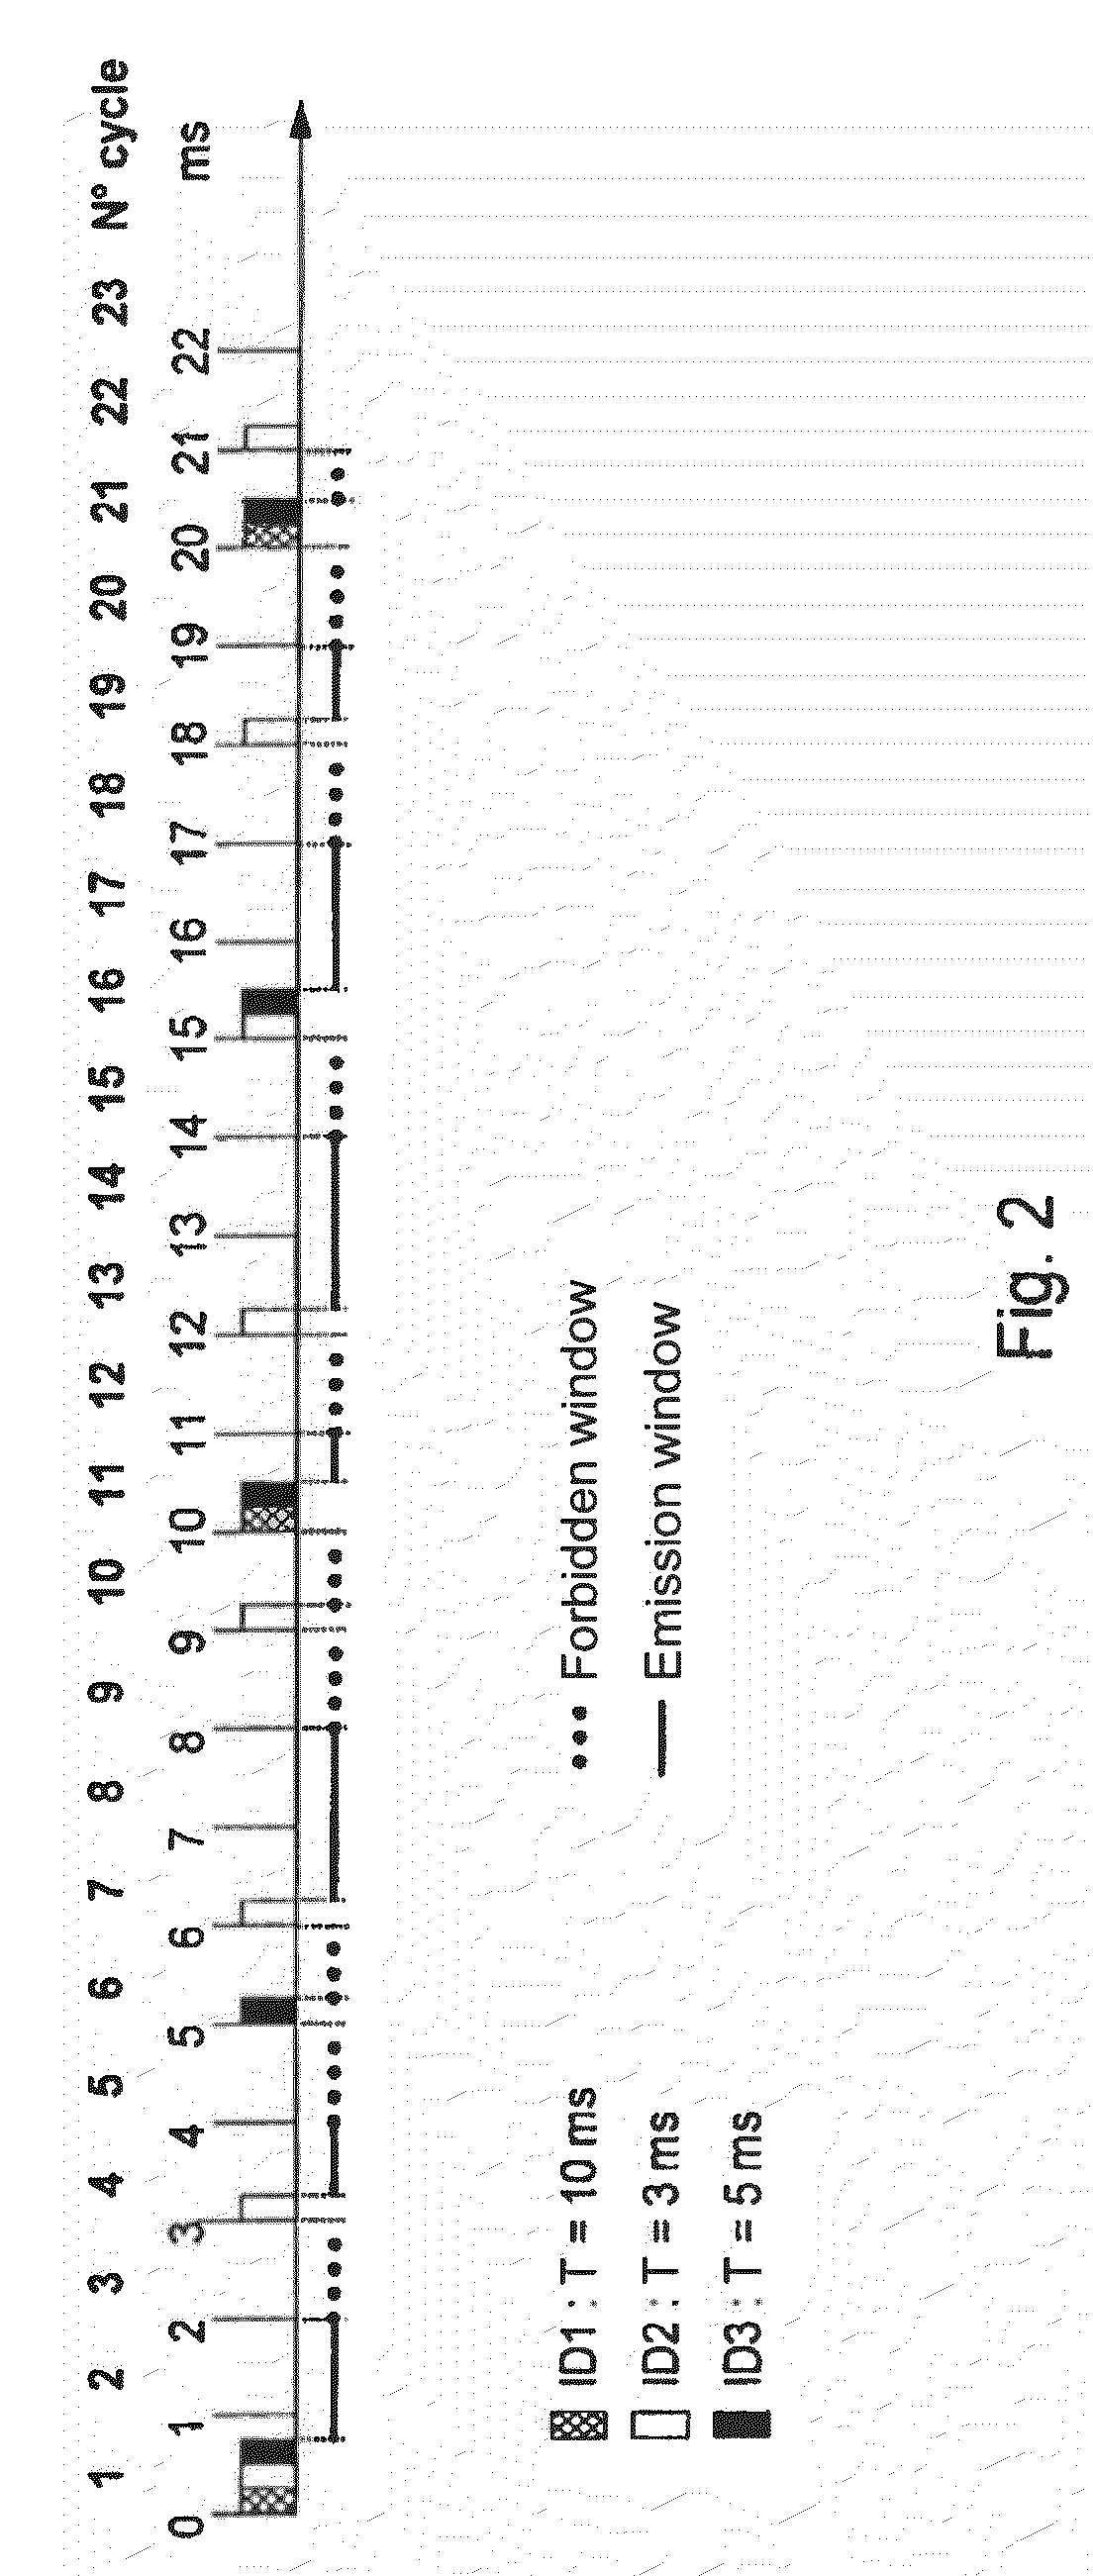 Method and device for exchanging diagnostic data for the simulation of aircraft computer networks